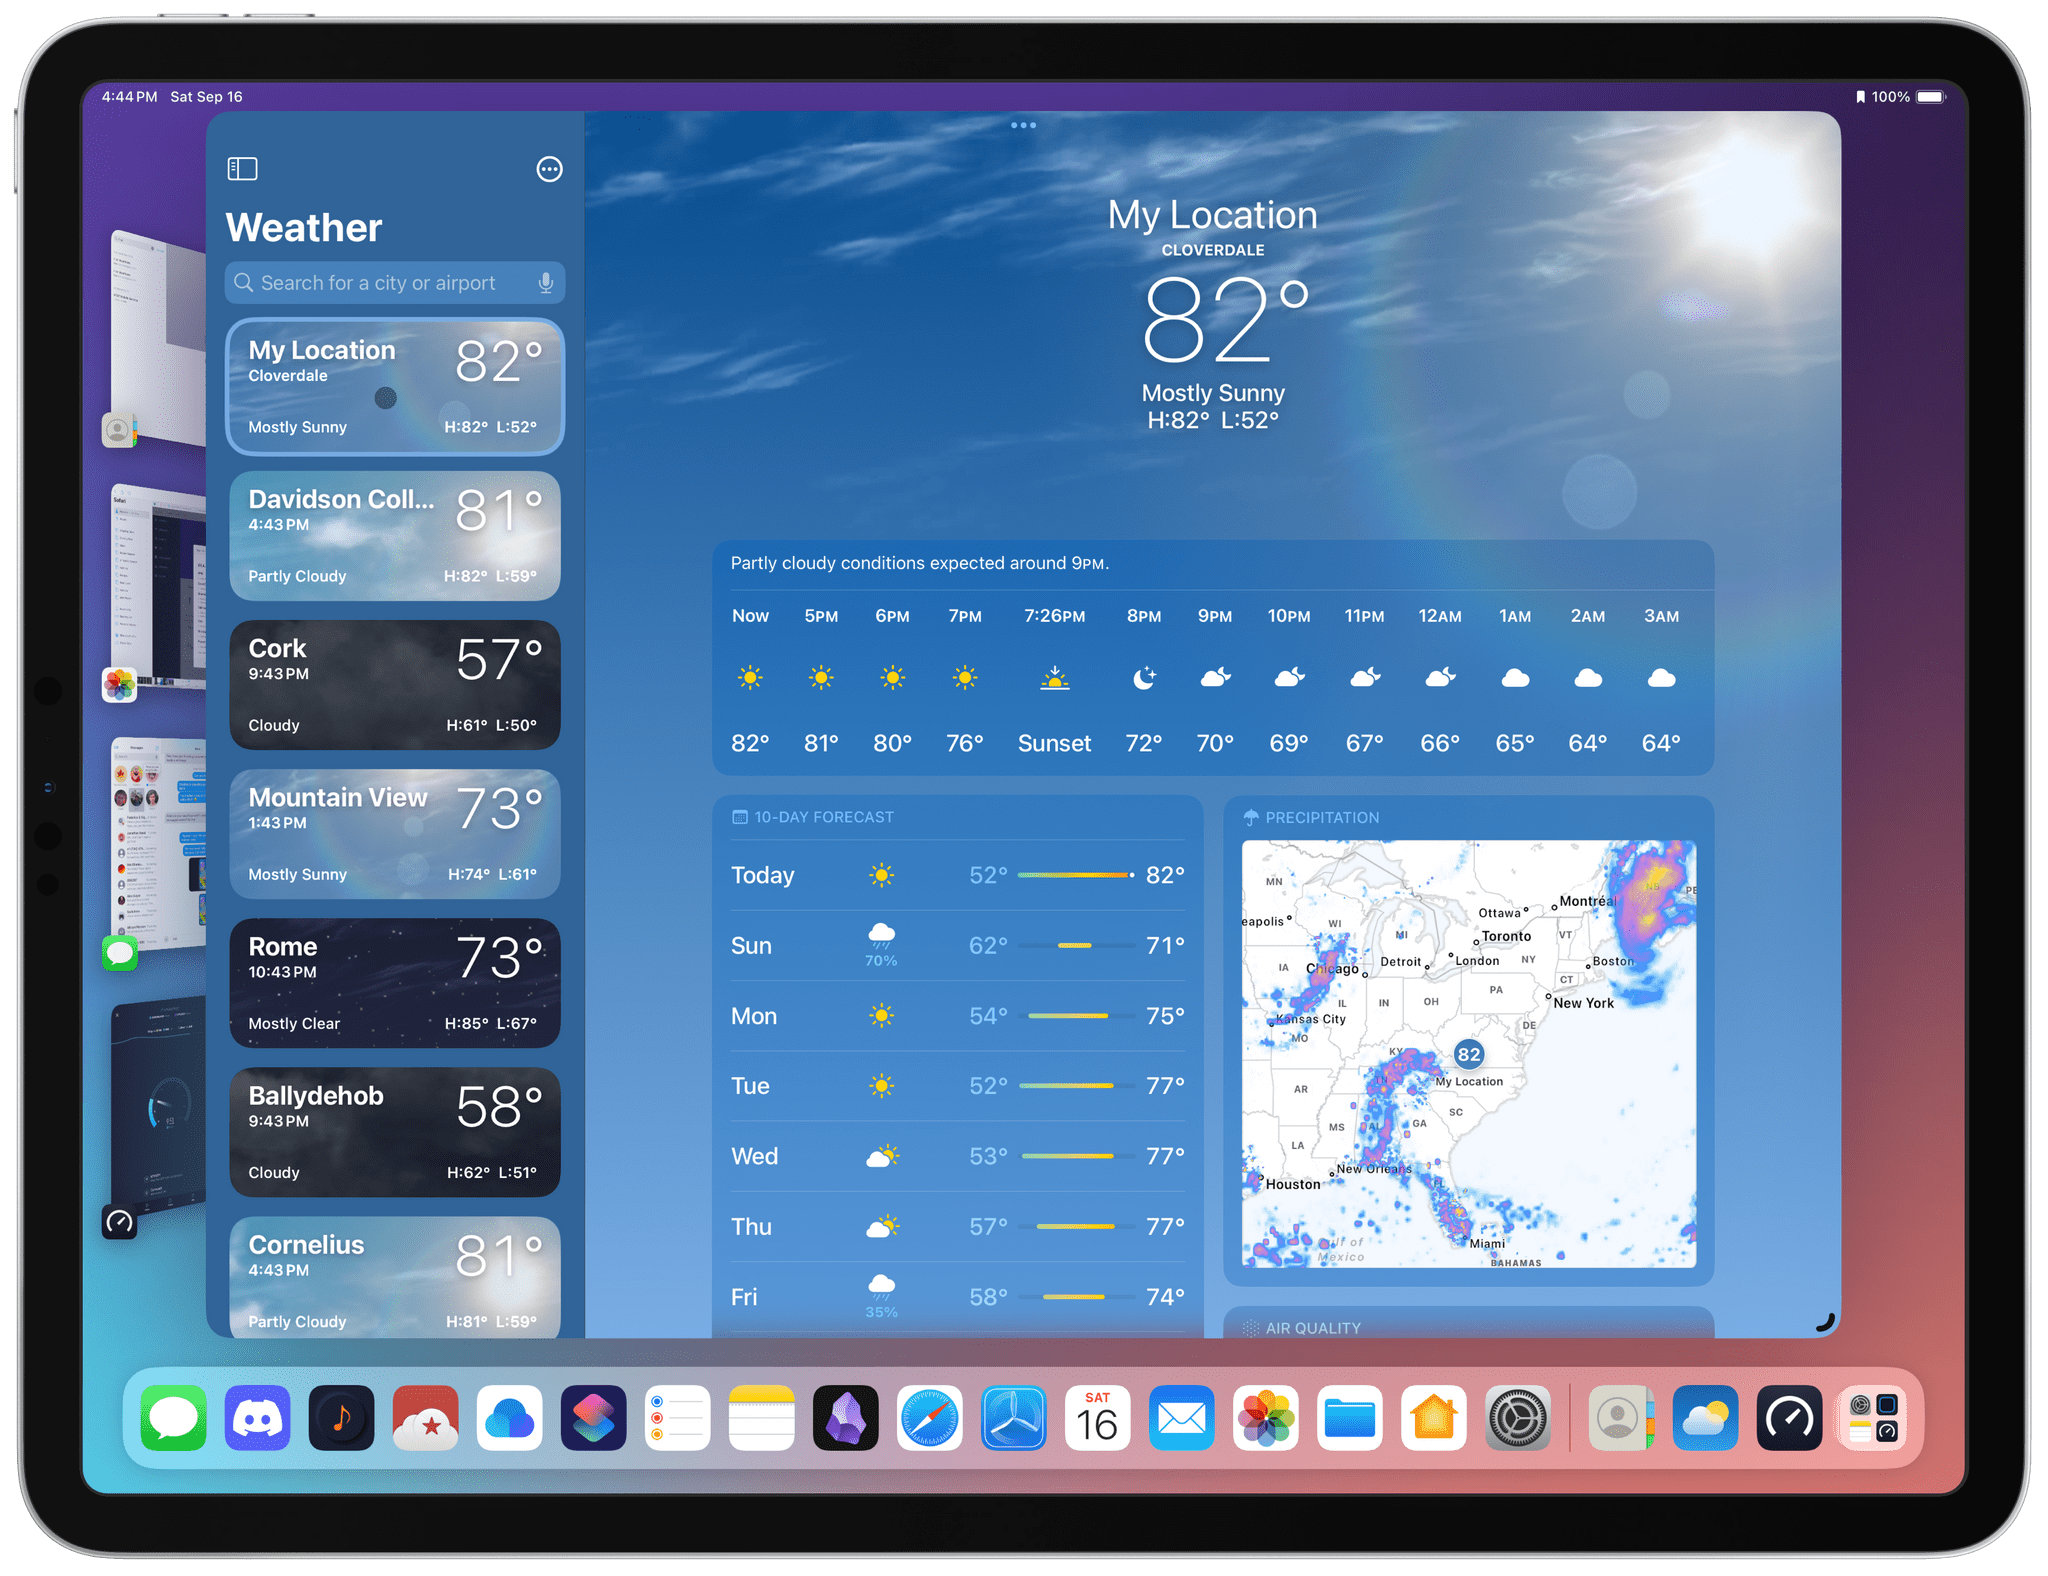 Apple has enhanced its visualizations to reflect the position of the sun and conditions.